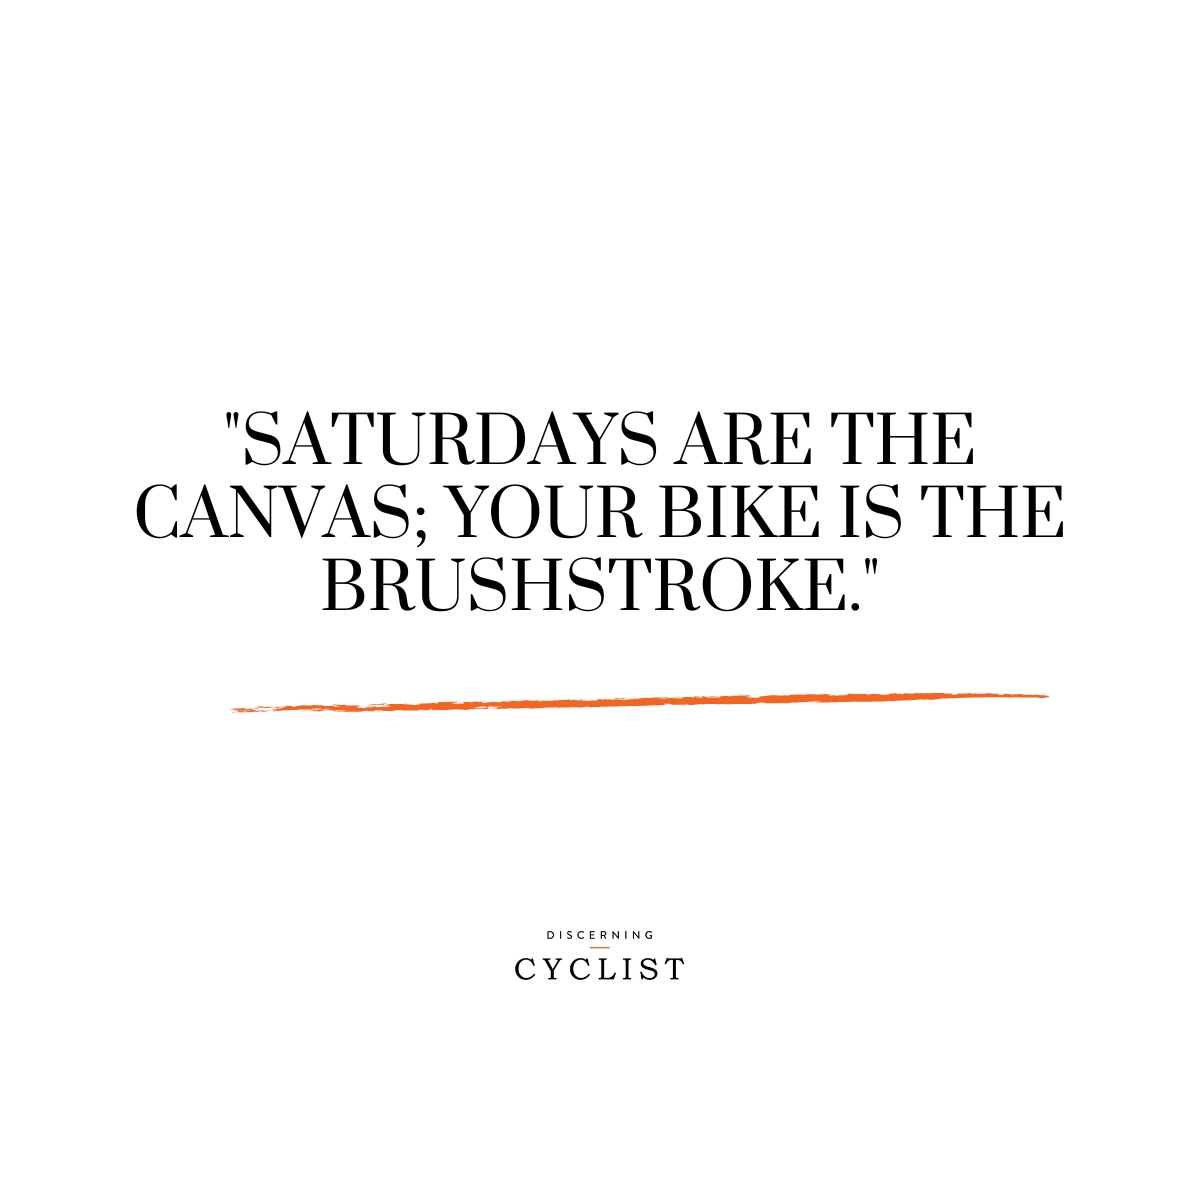 "Saturdays are the canvas; your bike is the brushstroke."